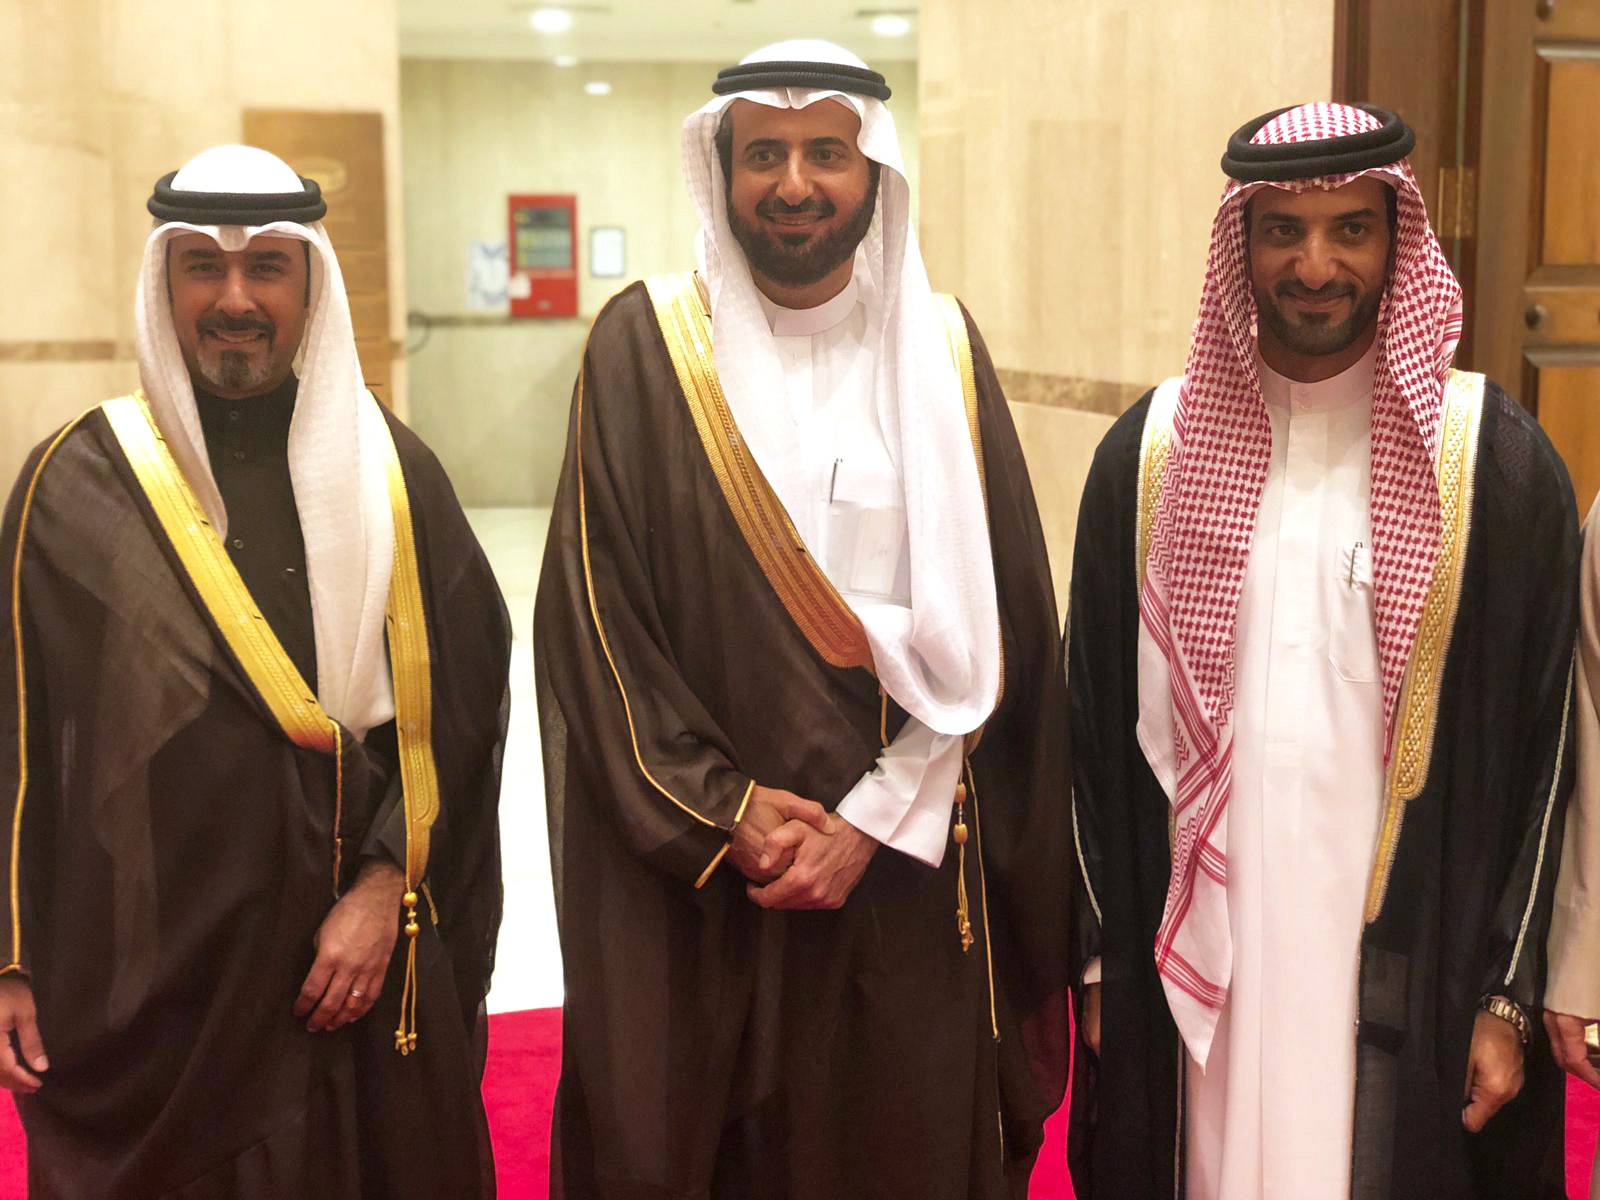 Kuwait's Information Ministry Assistant Undersecretary for News and Political Programs Mohammad bin Naji with other officials attending the eighth International Government Communication Forum